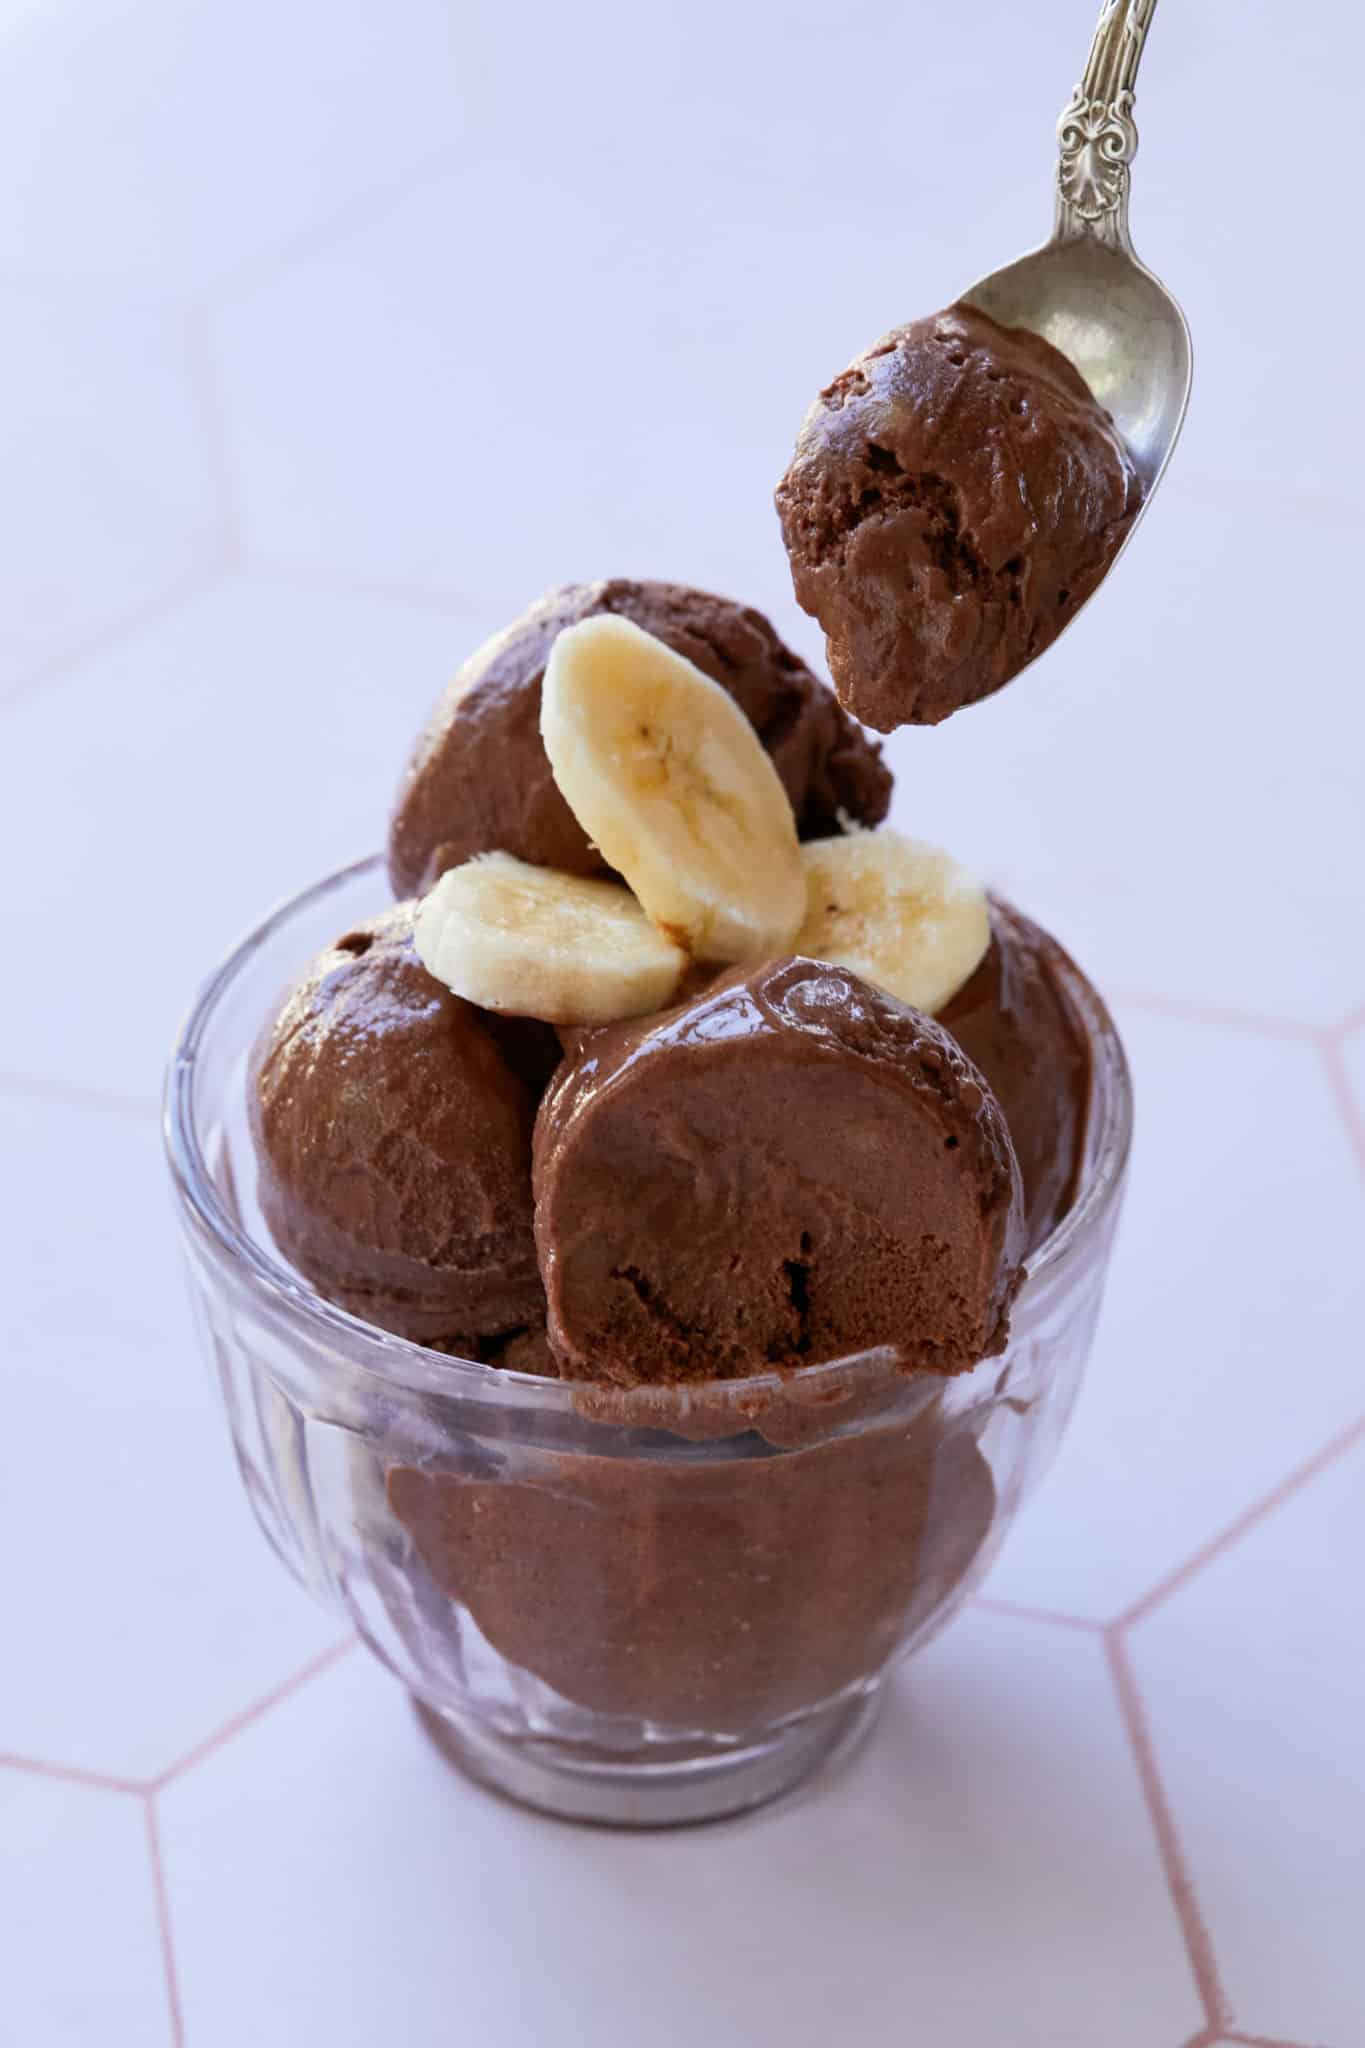 Healthy breakfast ice cream is served in a glass bowl, topped with fresh bananas. A spoonful of the chocolate nice ice is raised above the bowl.